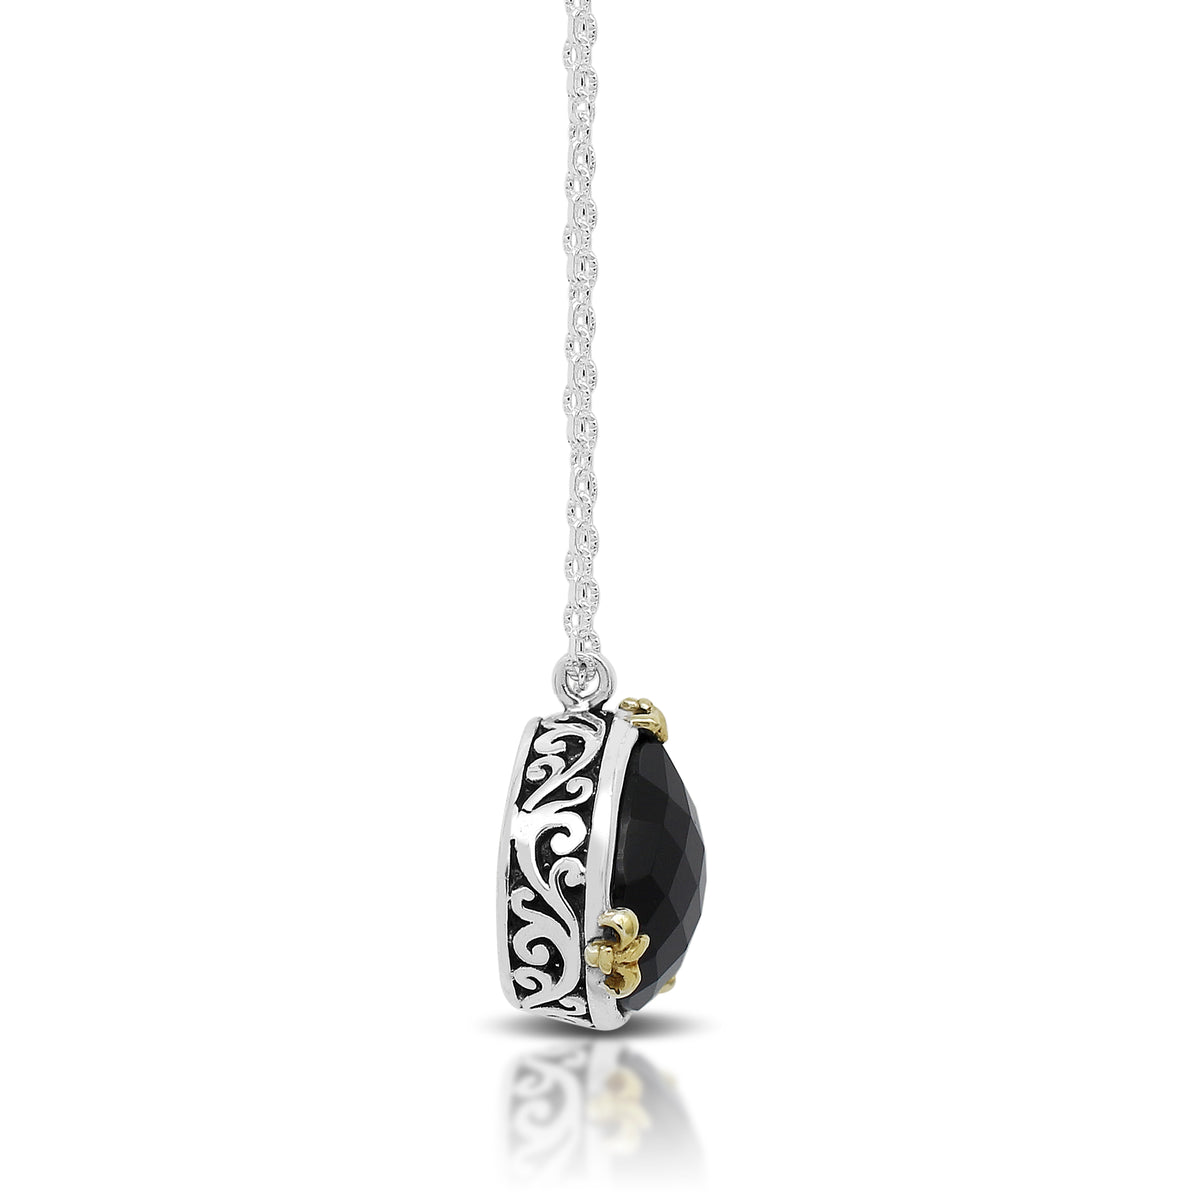 Teardrop Black Onyx Pendant (16mm) and Three Points 18K Vermeil Gold Plated Prongs Necklace 16" - 18"